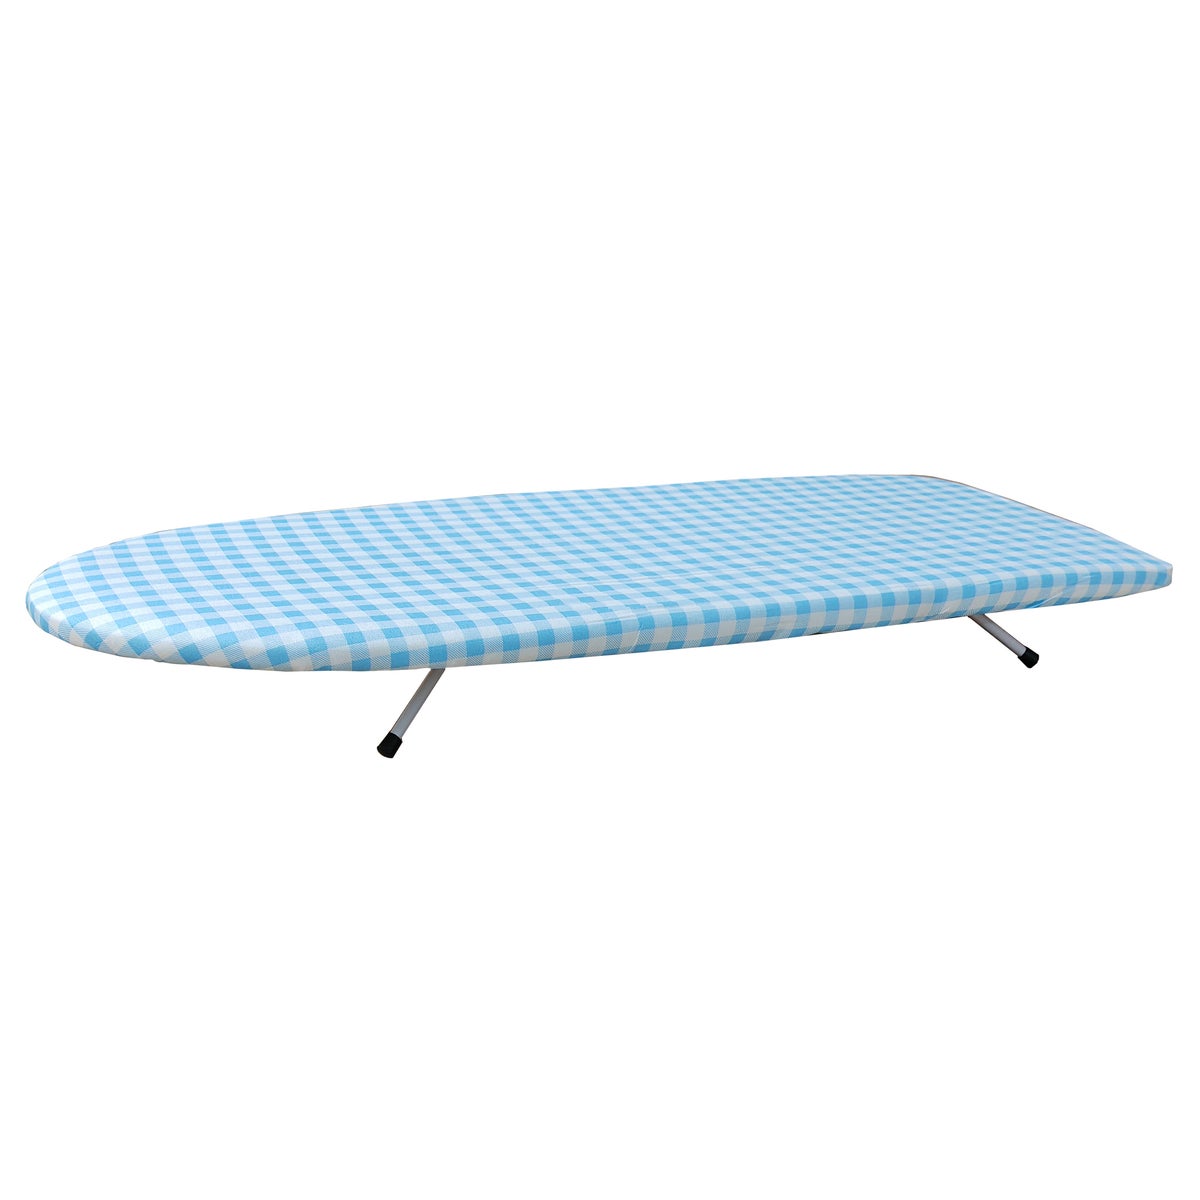 32" x 12" Table-Top Ironing Board (6)